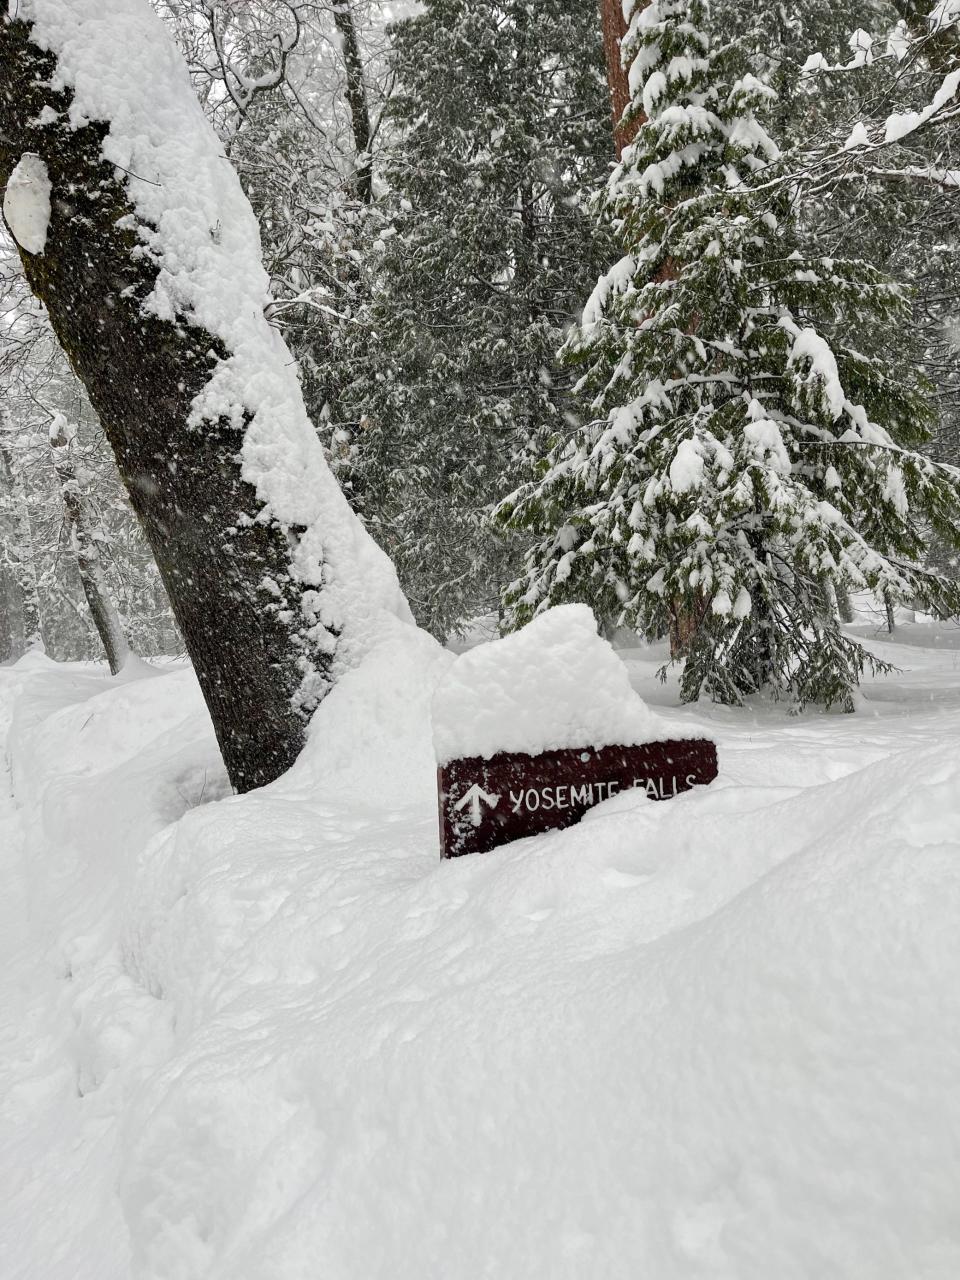 A snow covered sign in Yosemite National Park on March 6, 2023. Several storms and heavy snow forced officials to close the entire park on Feb. 25. It was anticipated to stay closed at least through March 12.